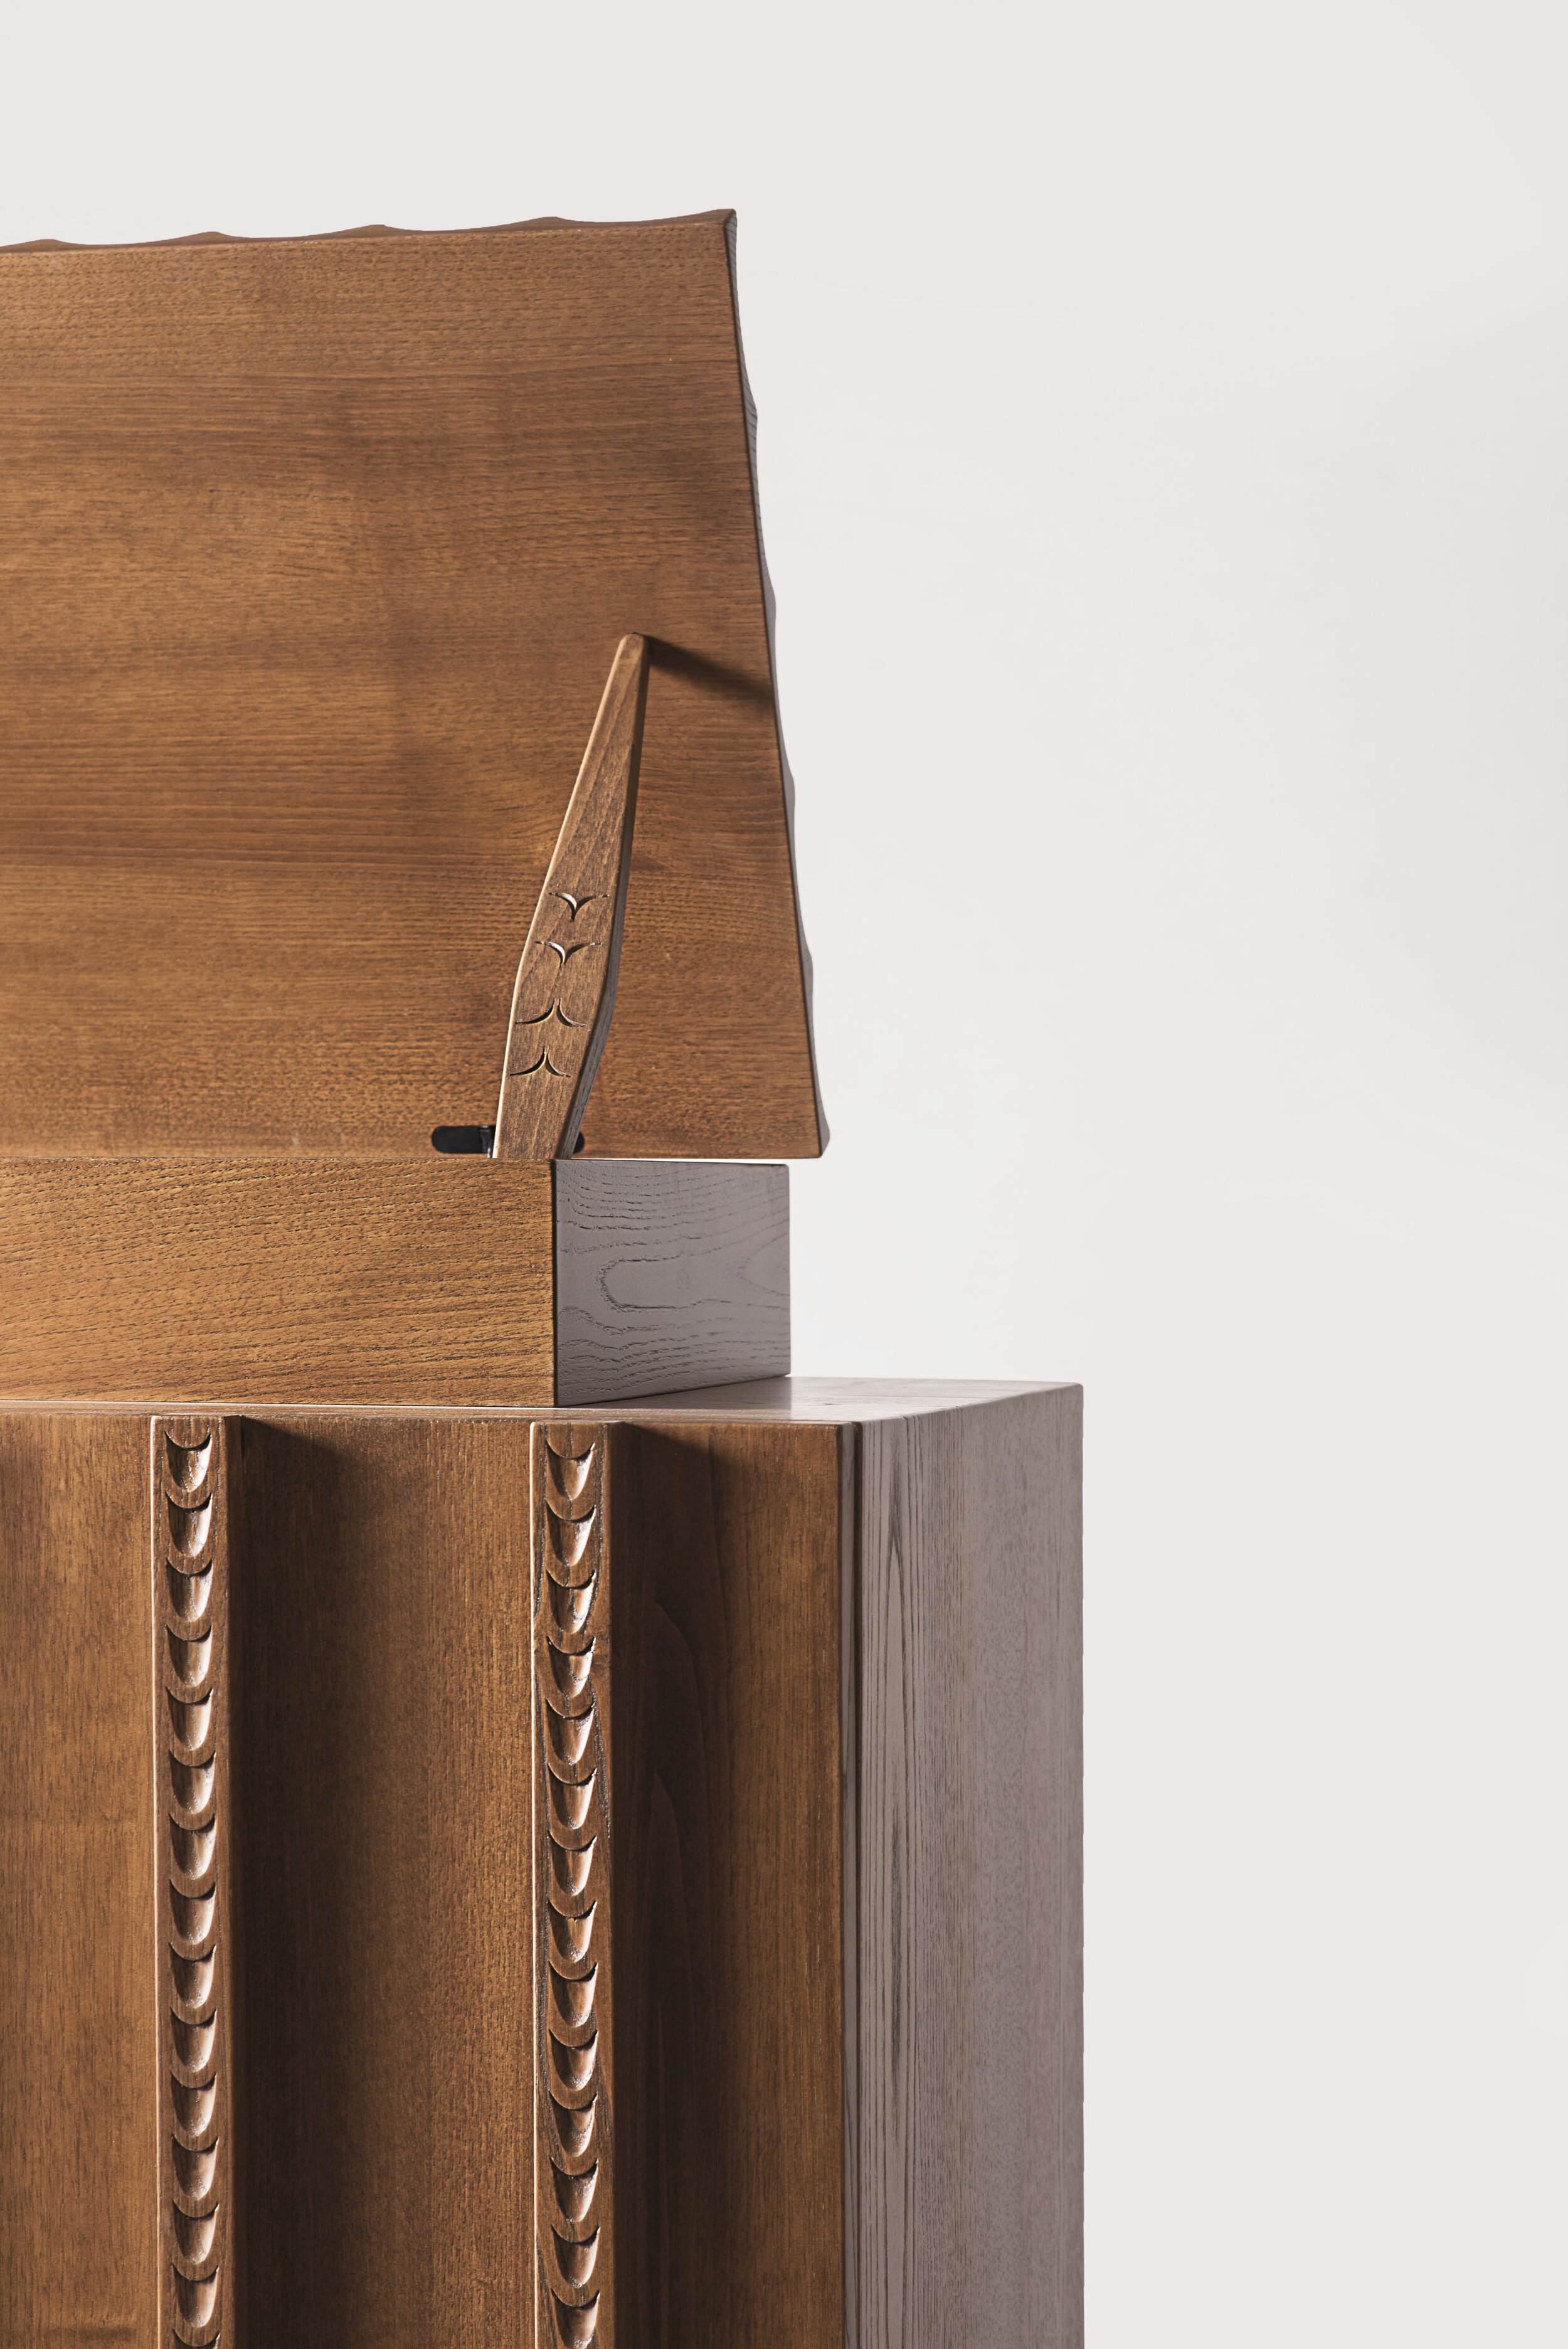 Ancas Sideboard, designed by Chiara Andreatti, made by Pierpaolo Mandis for Pretziada_top open detail.jpg